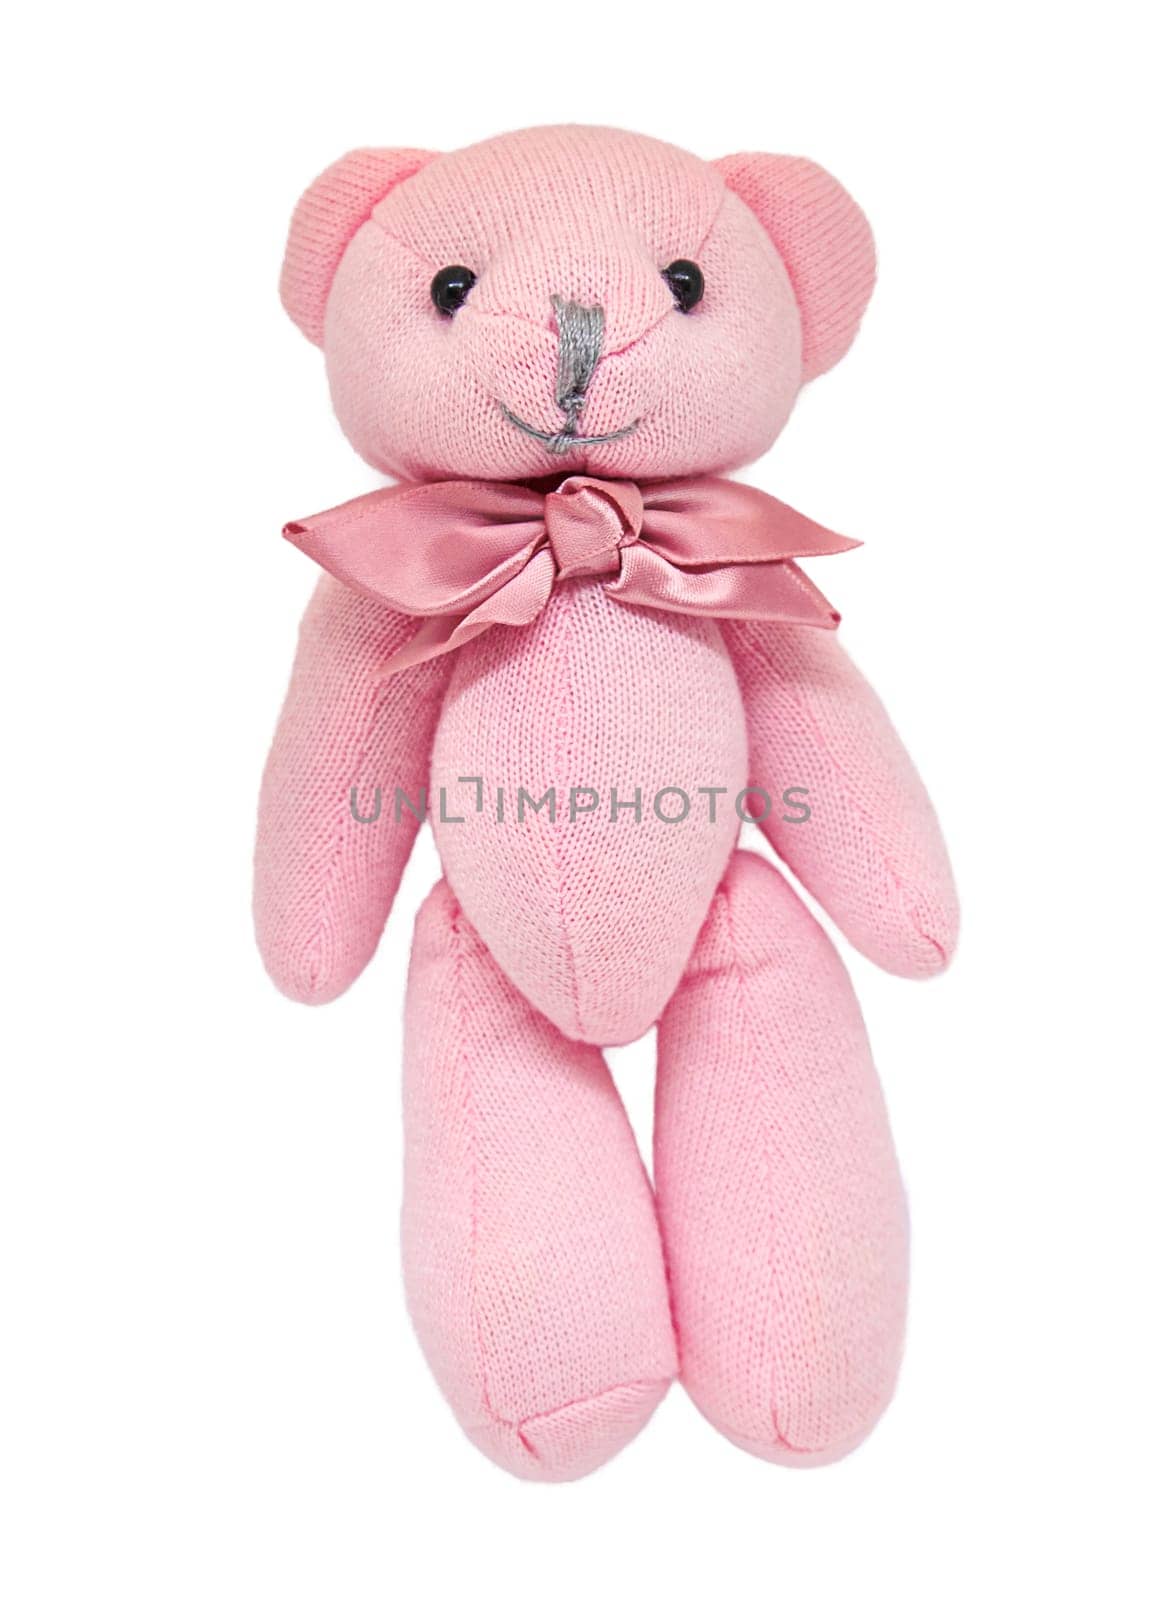 Teddy bear pink isolate on a white background. Selective focus. by yanadjana